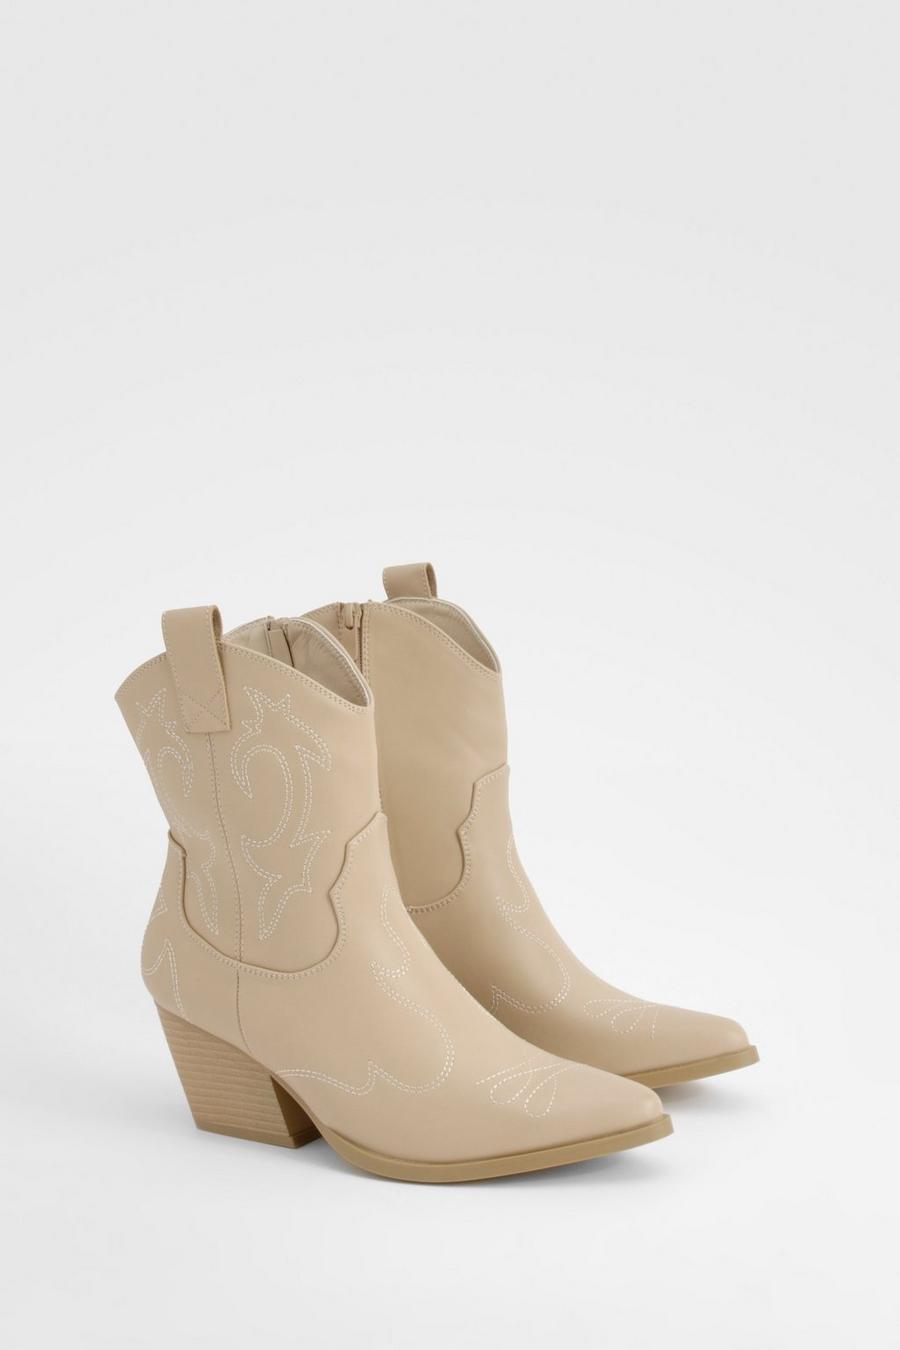 Stitch Detail Western Ankle Boots, Sand